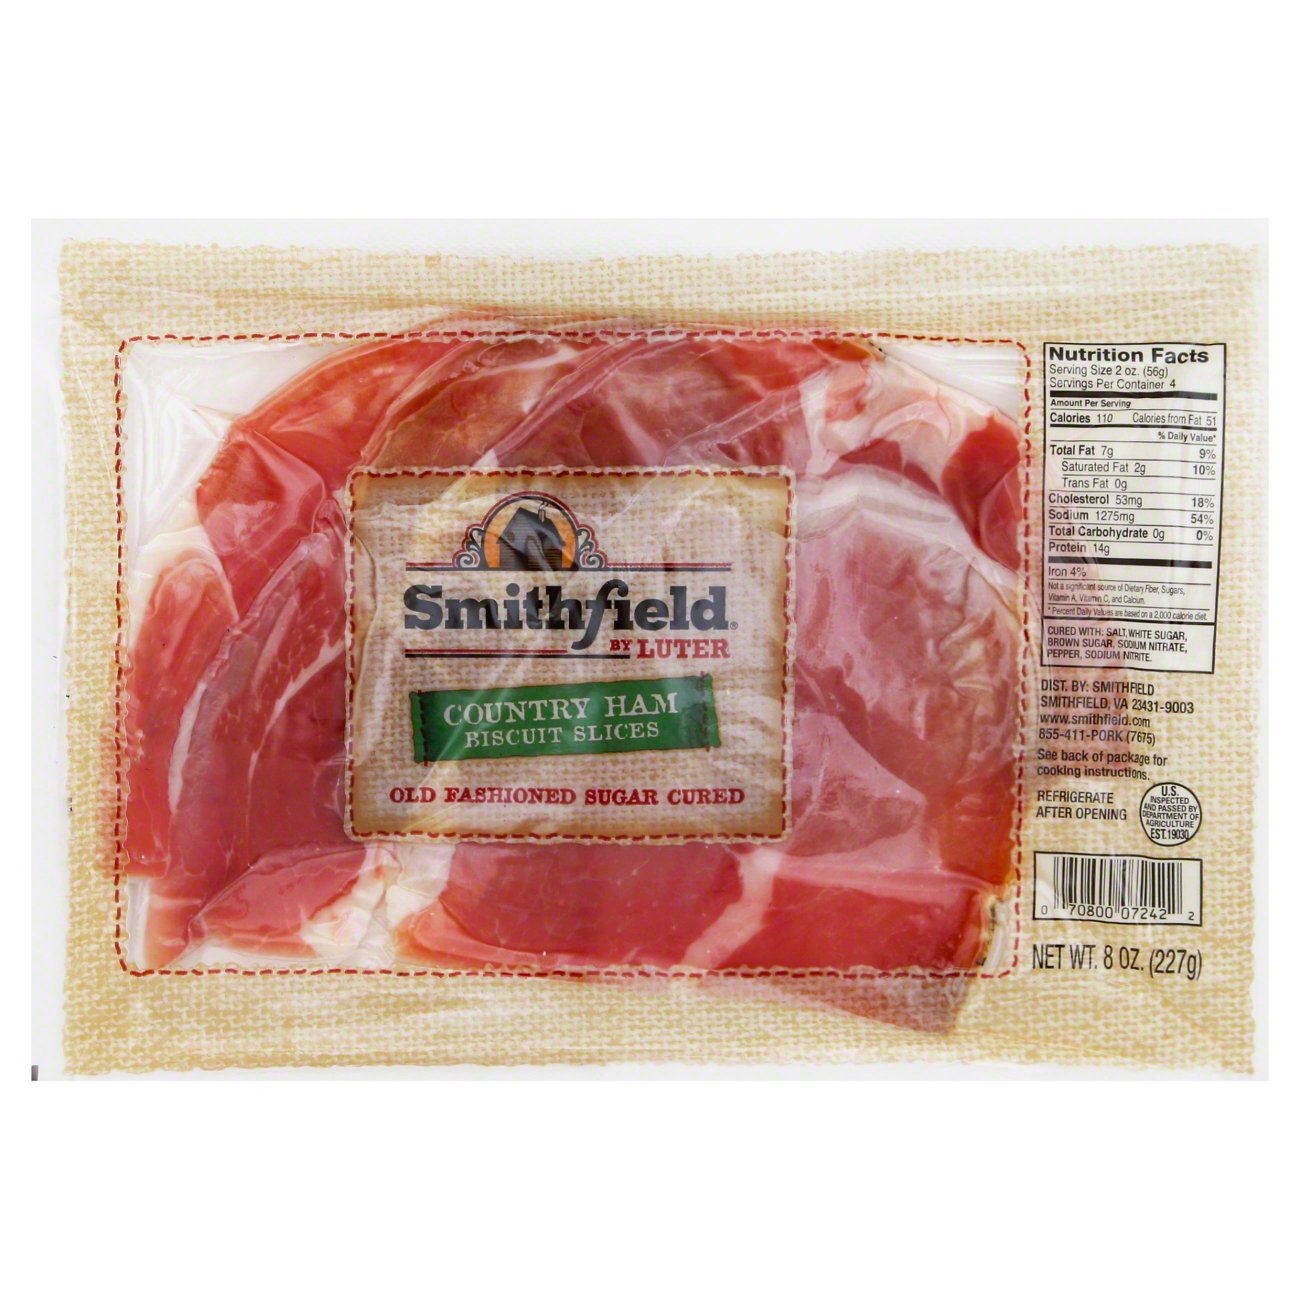 How To Cook A Smithfield Country Ham - Mealvalley17